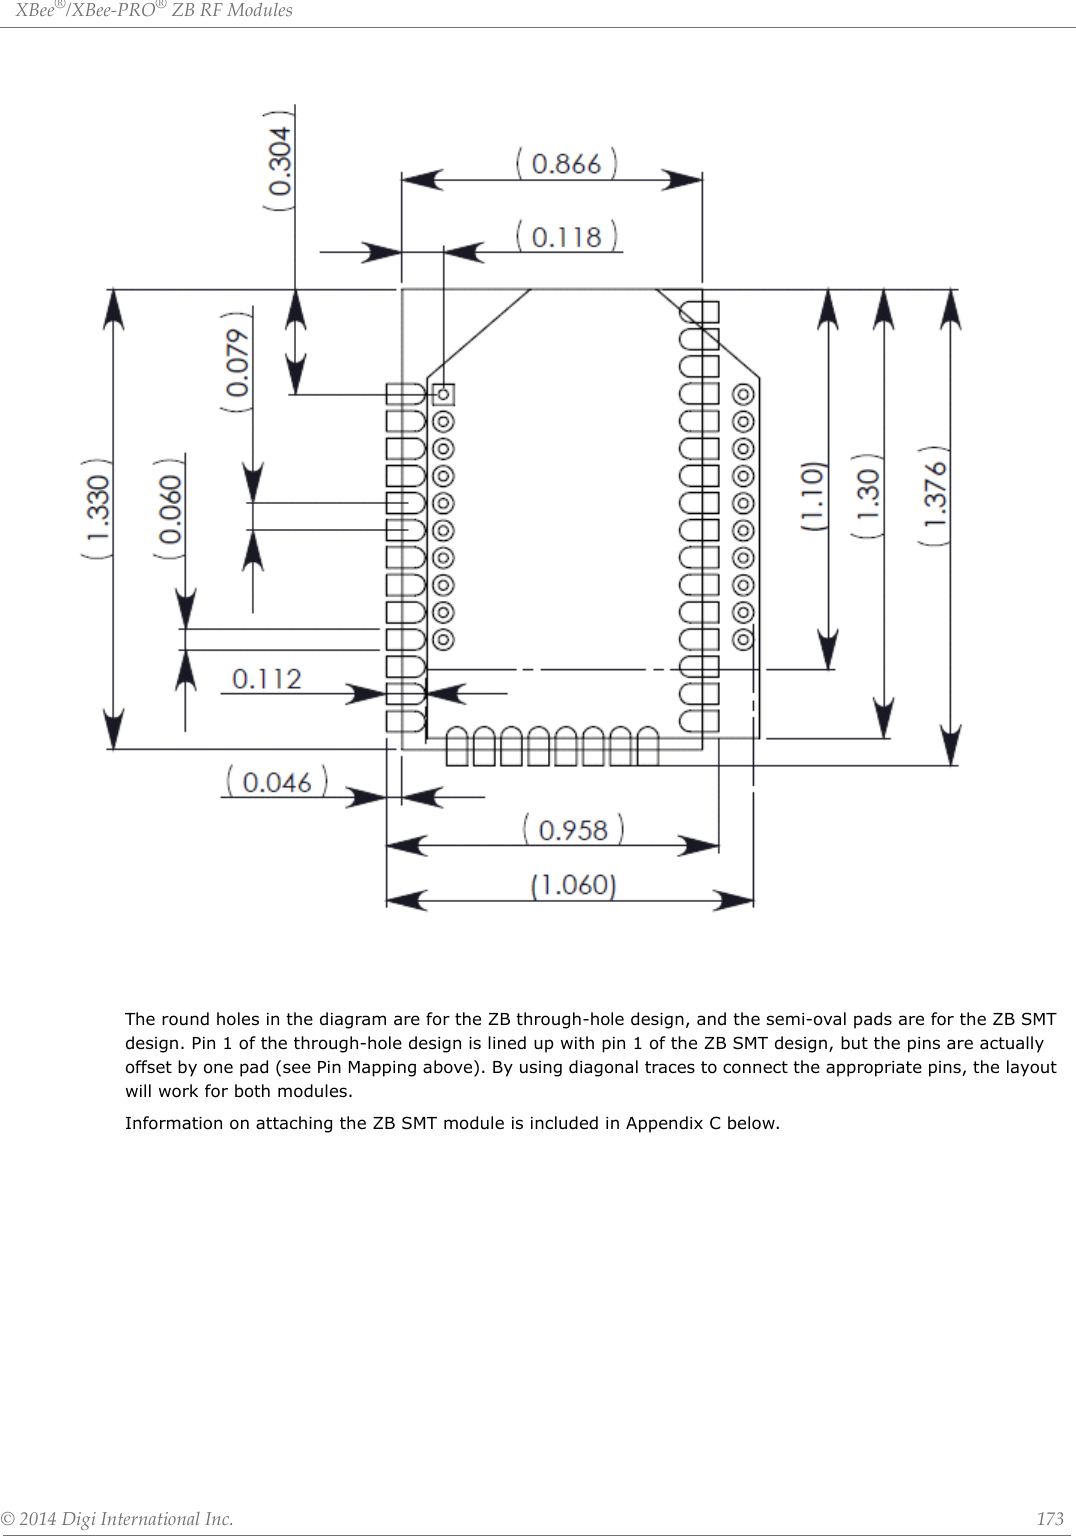 XBee®/XBee‐PRO®ZBRFModules©2014DigiInternationalInc. 173The round holes in the diagram are for the ZB through-hole design, and the semi-oval pads are for the ZB SMT design. Pin 1 of the through-hole design is lined up with pin 1 of the ZB SMT design, but the pins are actually offset by one pad (see Pin Mapping above). By using diagonal traces to connect the appropriate pins, the layout will work for both modules.Information on attaching the ZB SMT module is included in Appendix C below.